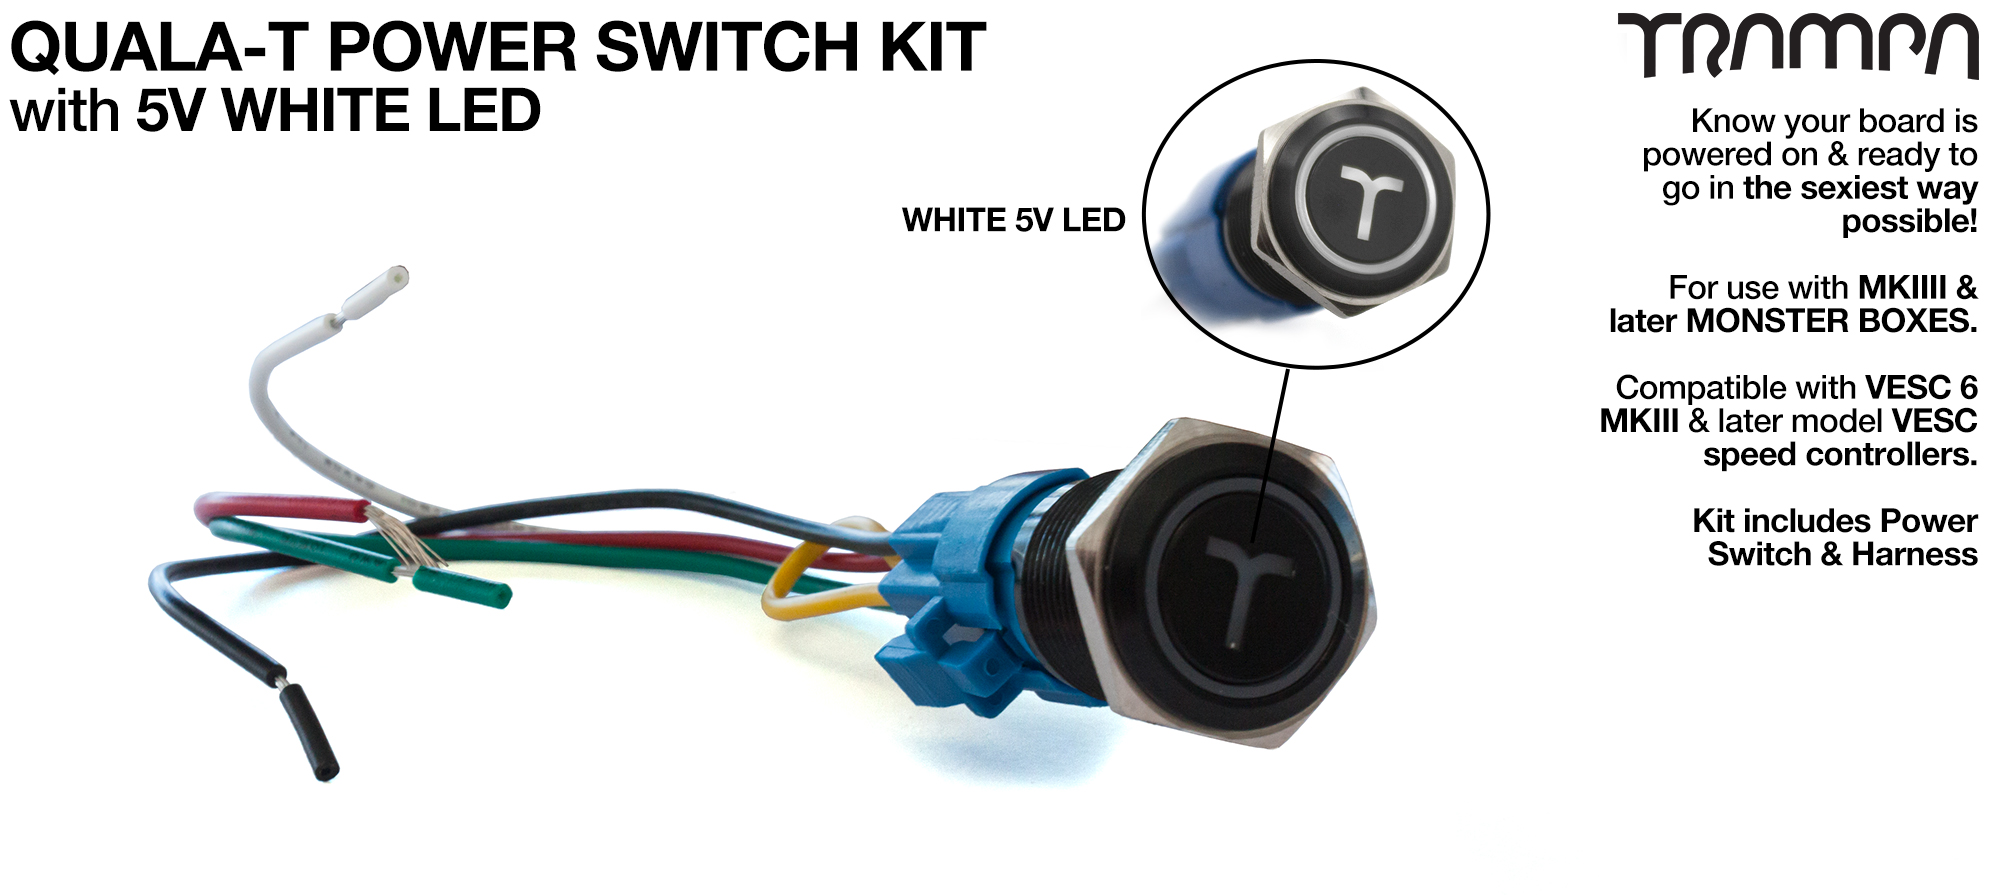 WHITE LED QUALA-T Power Switch Kit with 16mm Fixing Nut & Cable Harness